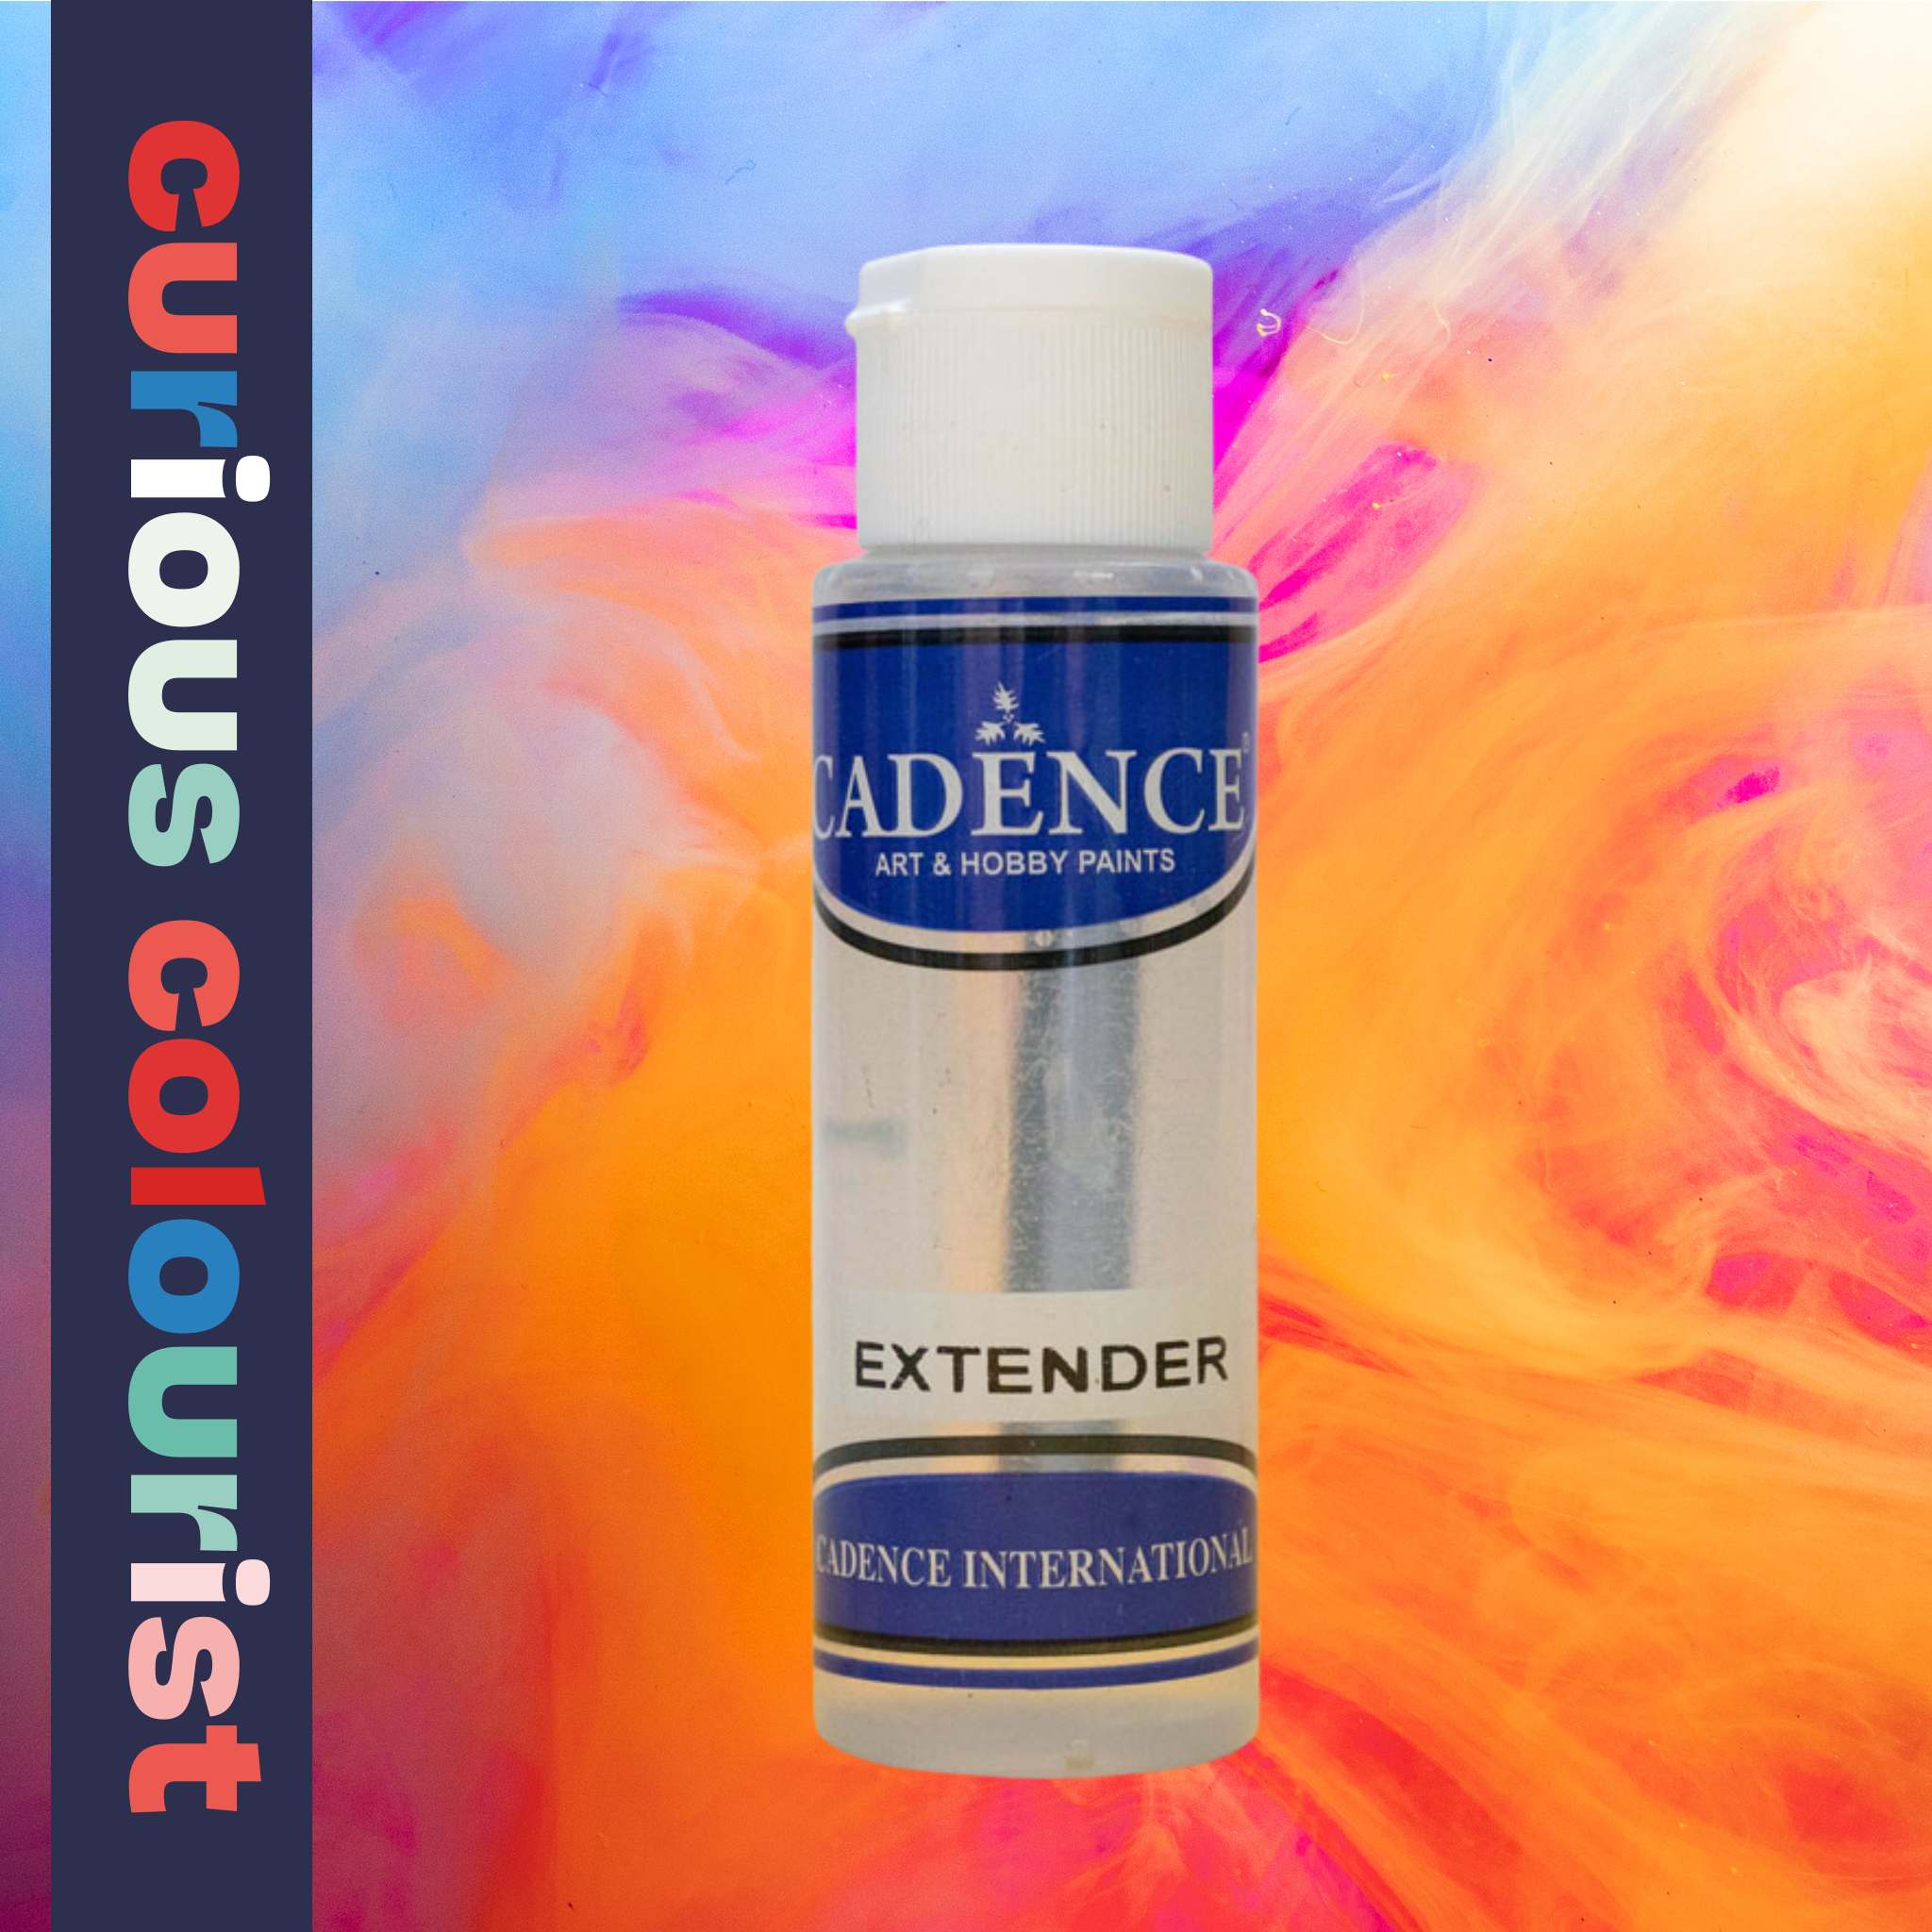 This specially formulated liquid will allow you to thin down your paints in a more sophisticated way than just water.